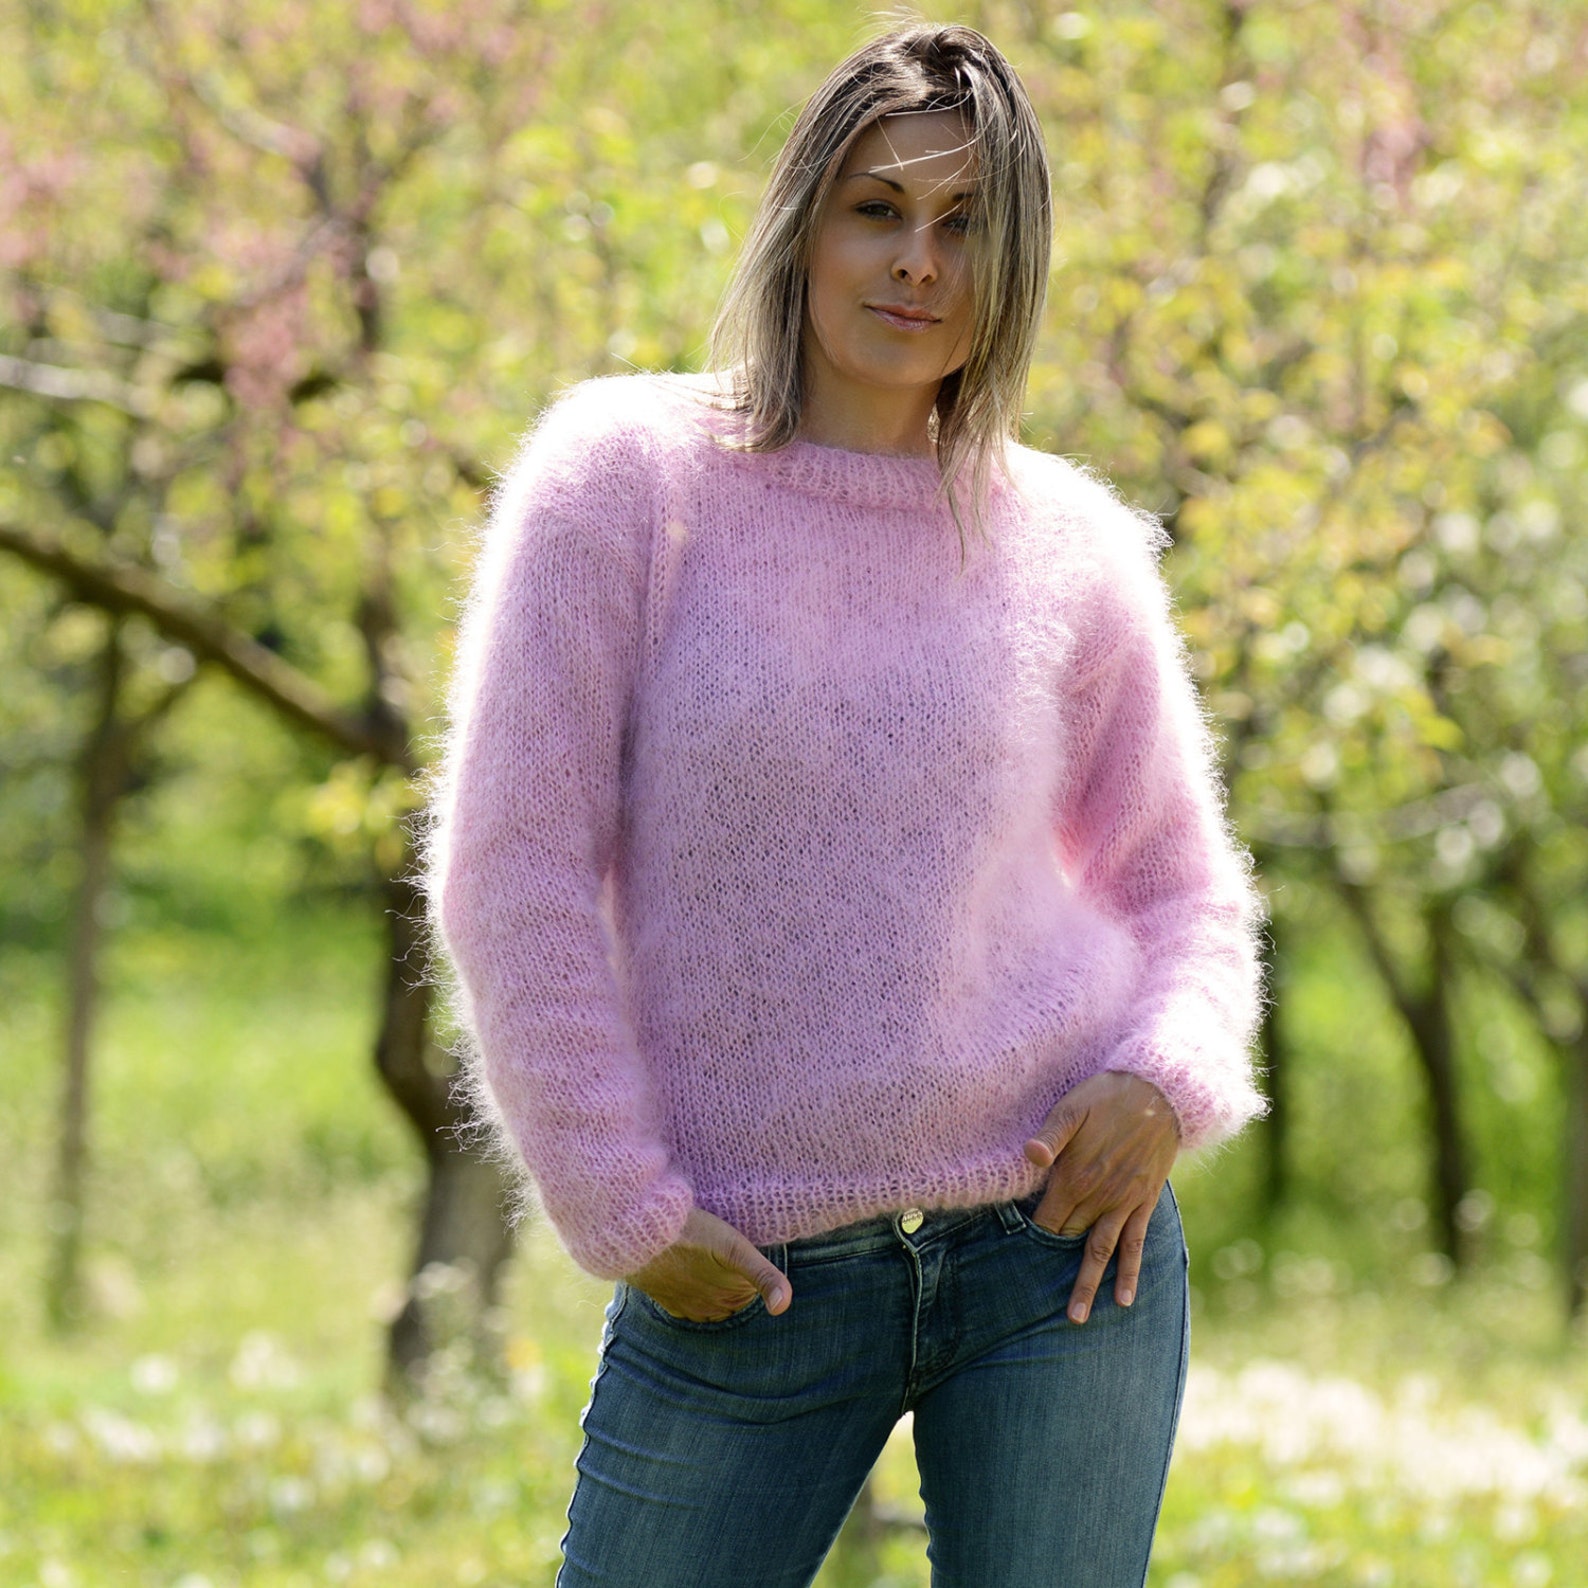 Hand Knitted Mohair Sweater Pink Color Fuzzy Crew Neck Jumper - Etsy